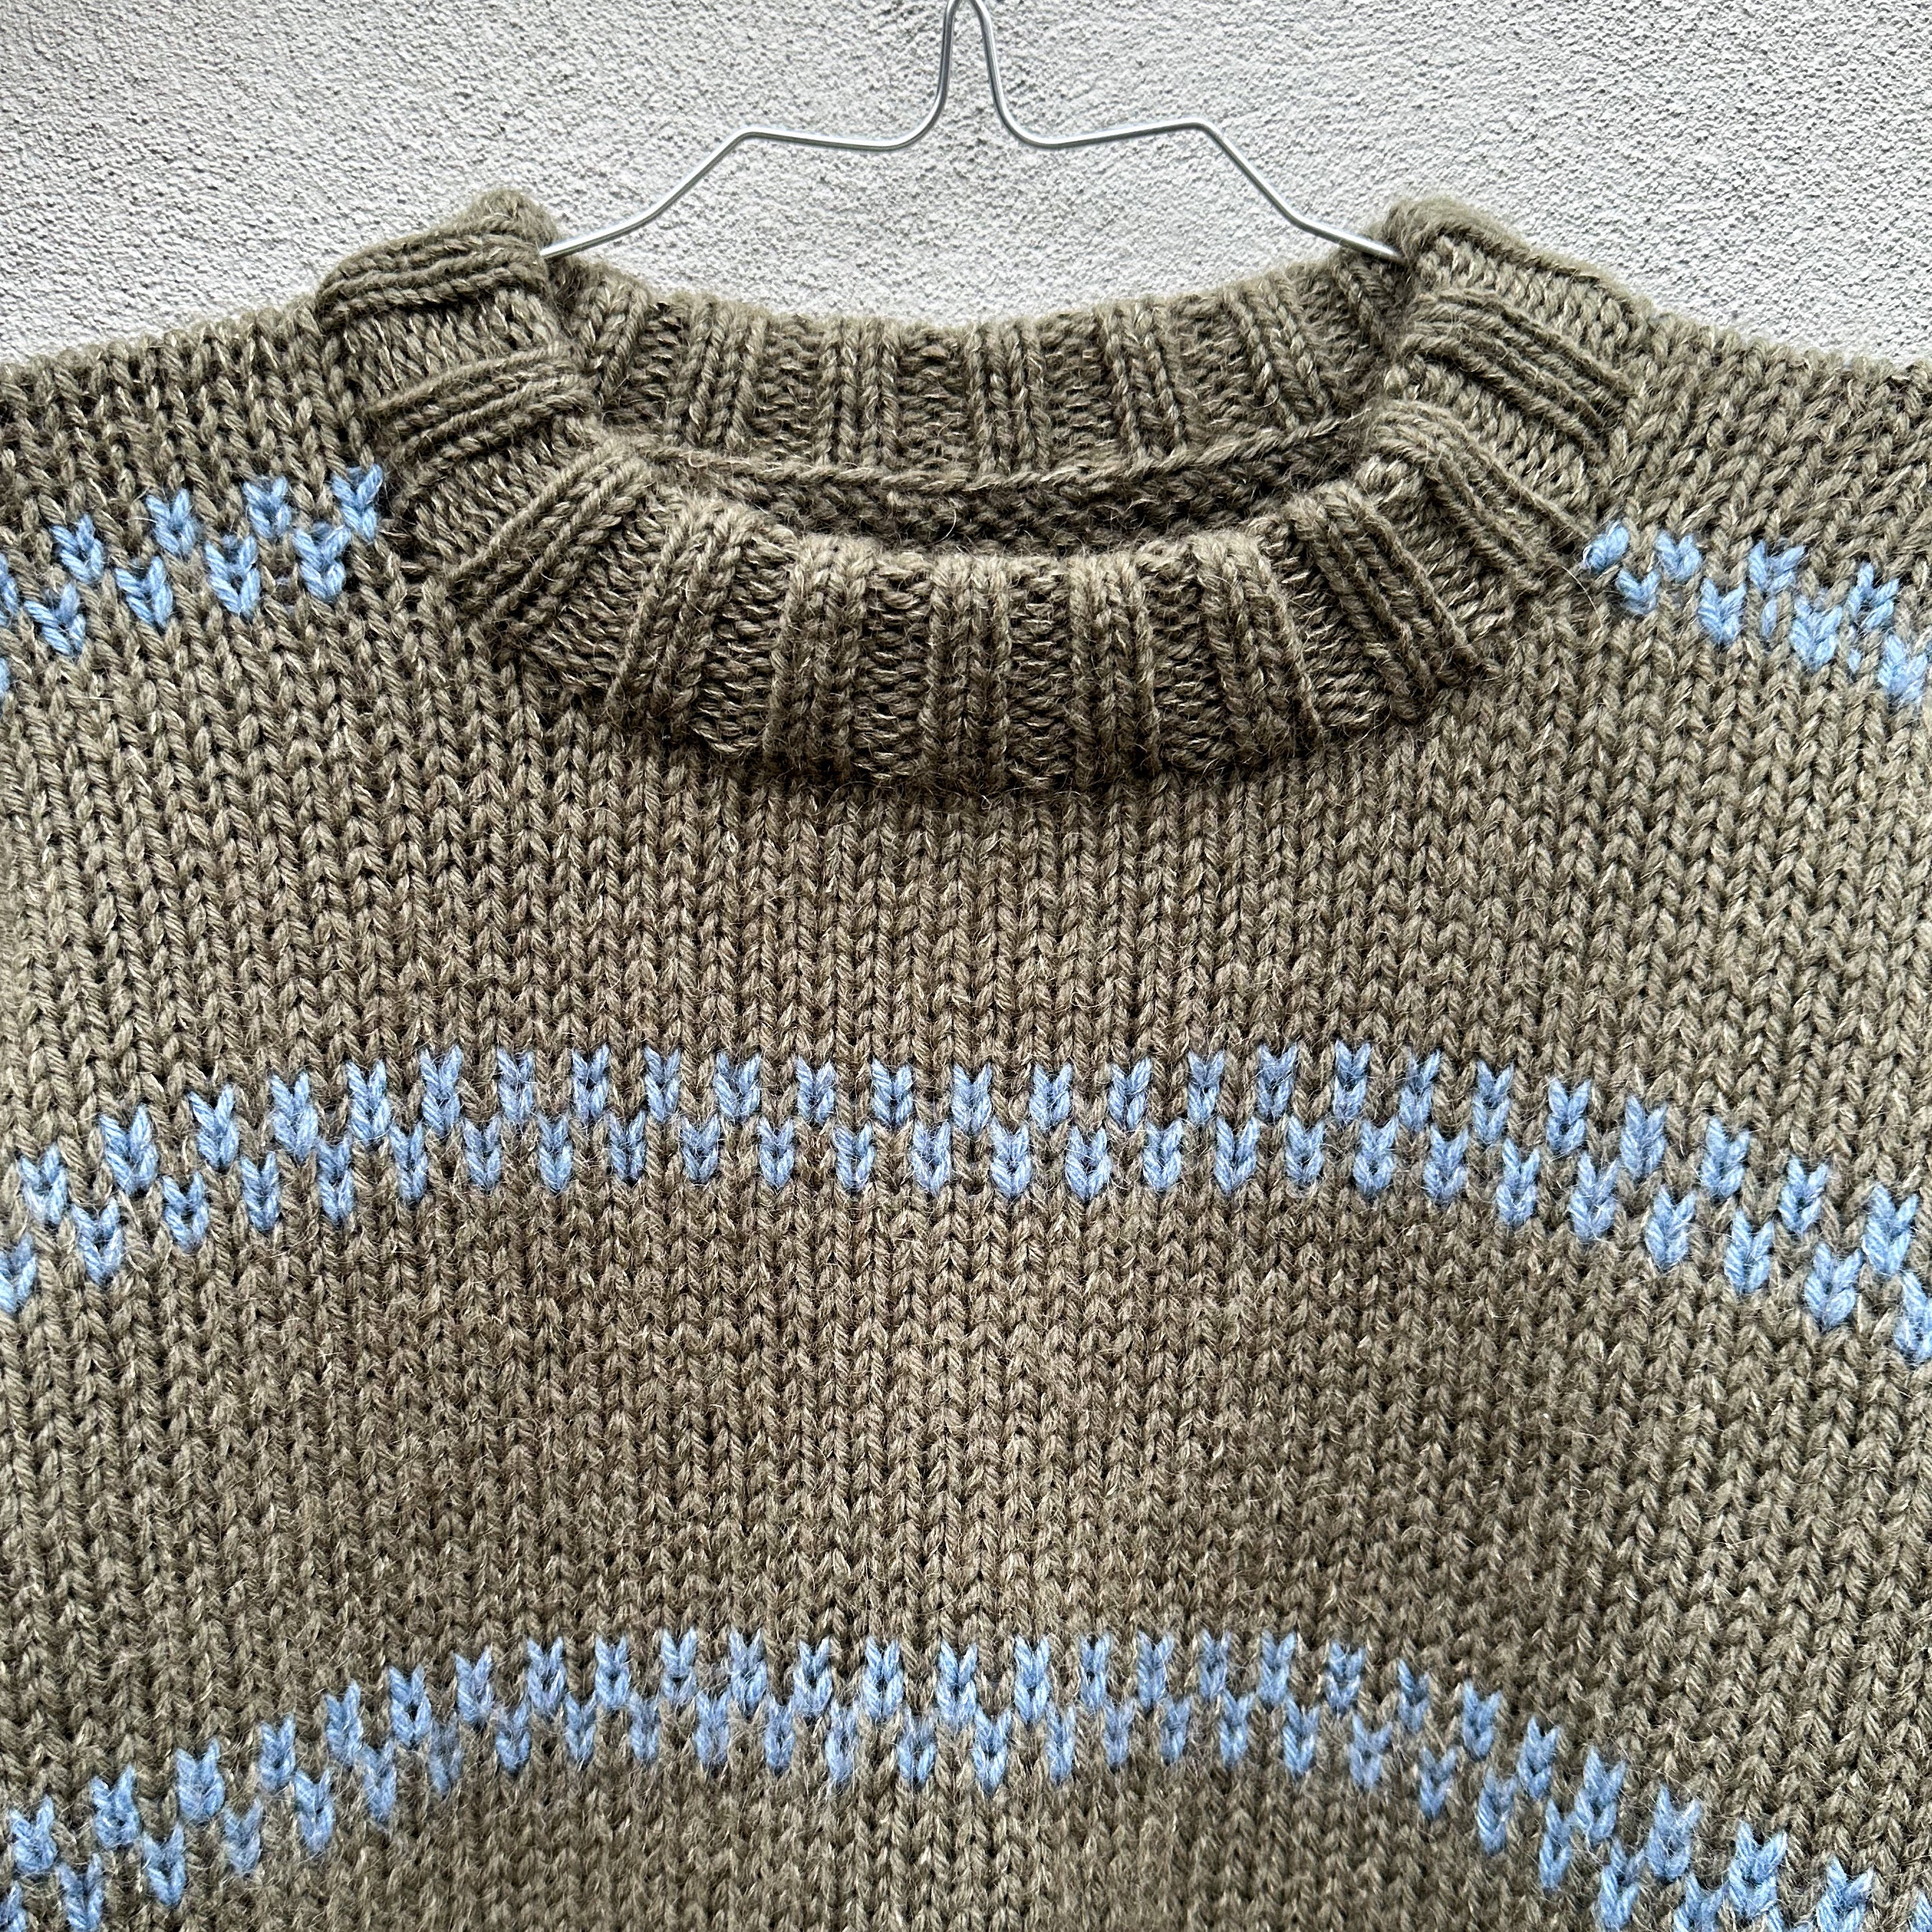 Knitting for Olive - Timeless knitting patterns and sustainable yarn